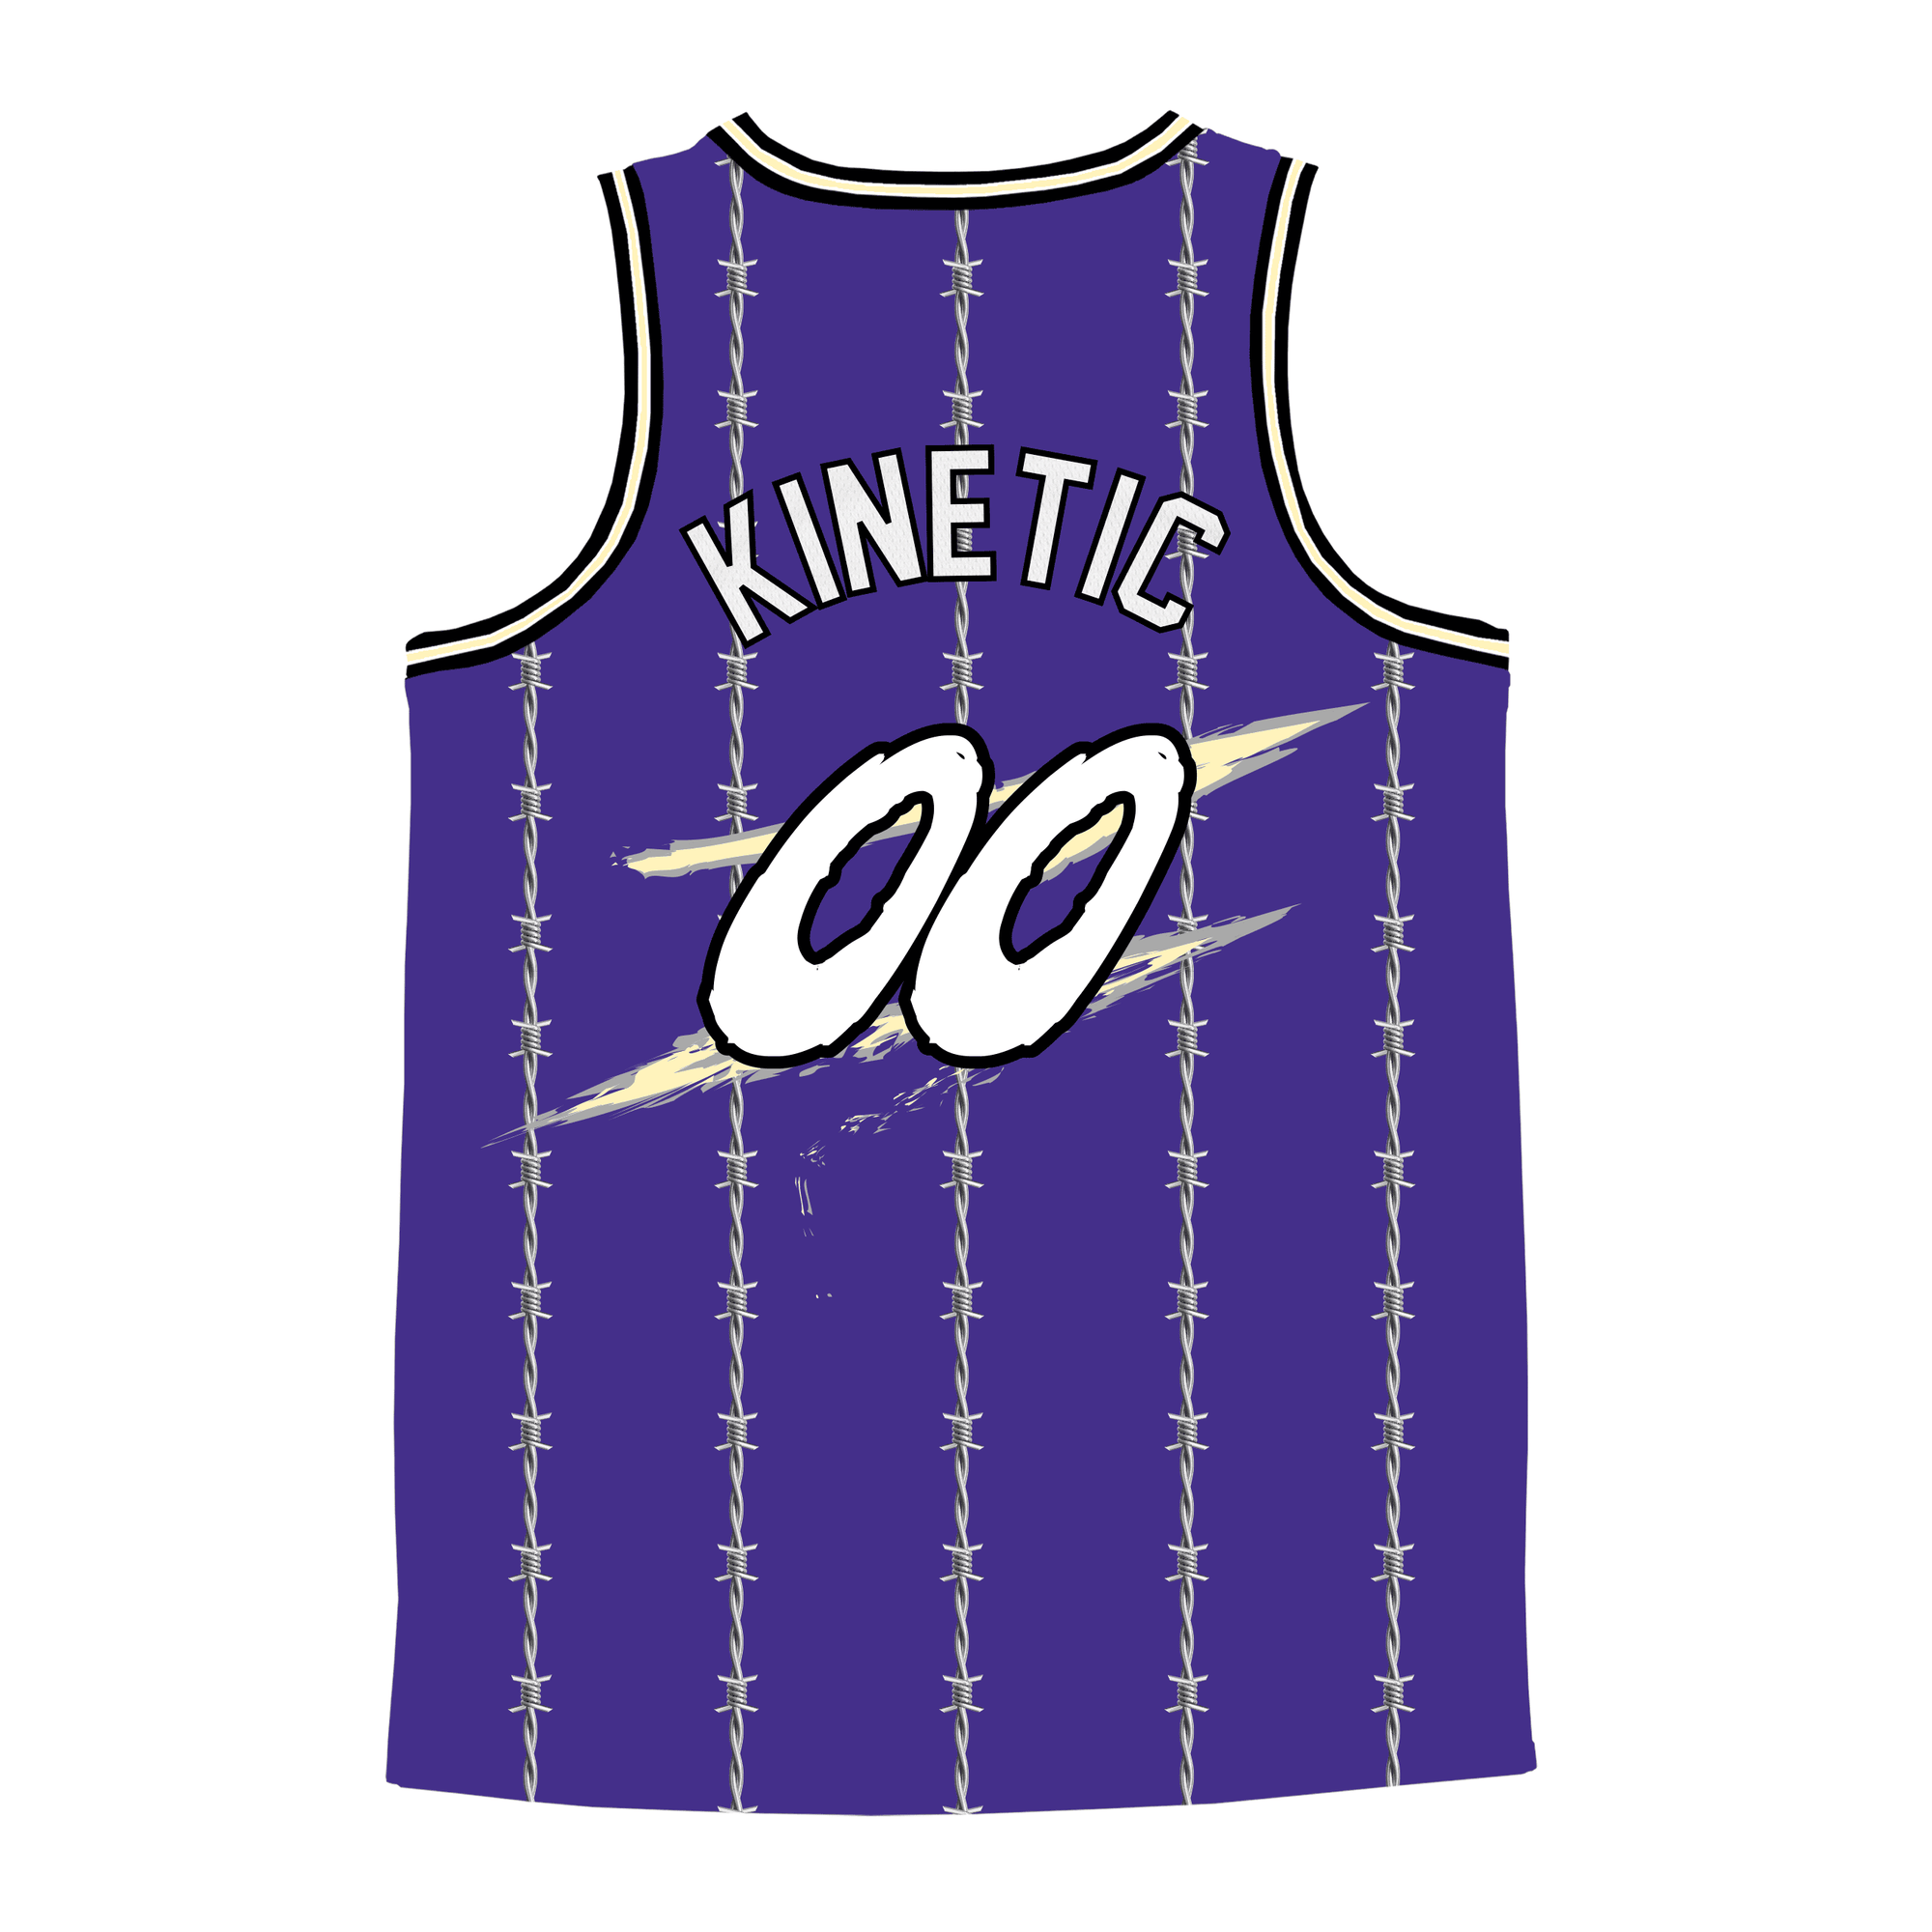 Alpha Tau Omega - Barbed Wire Basketball Jersey